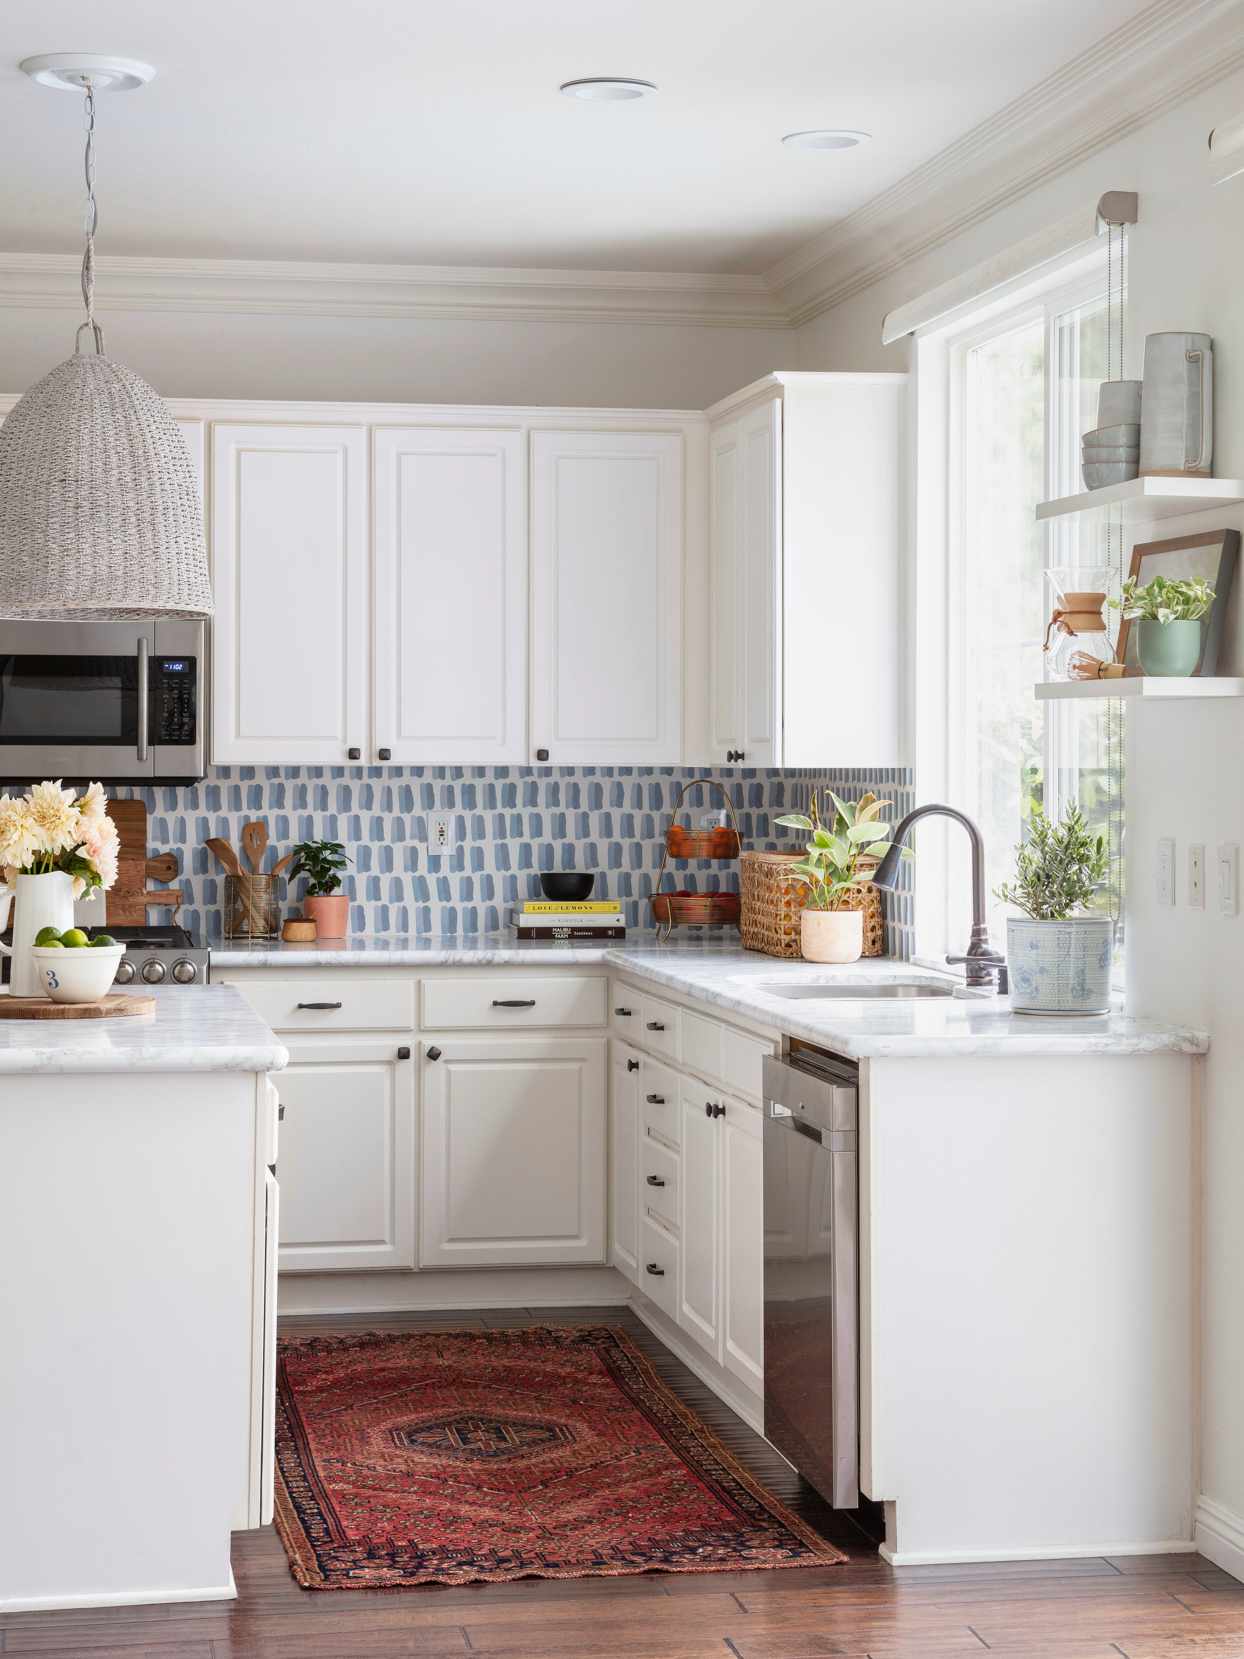 25 Small Kitchen Decor Ideas to Make a Sizzling Statement   Better ...